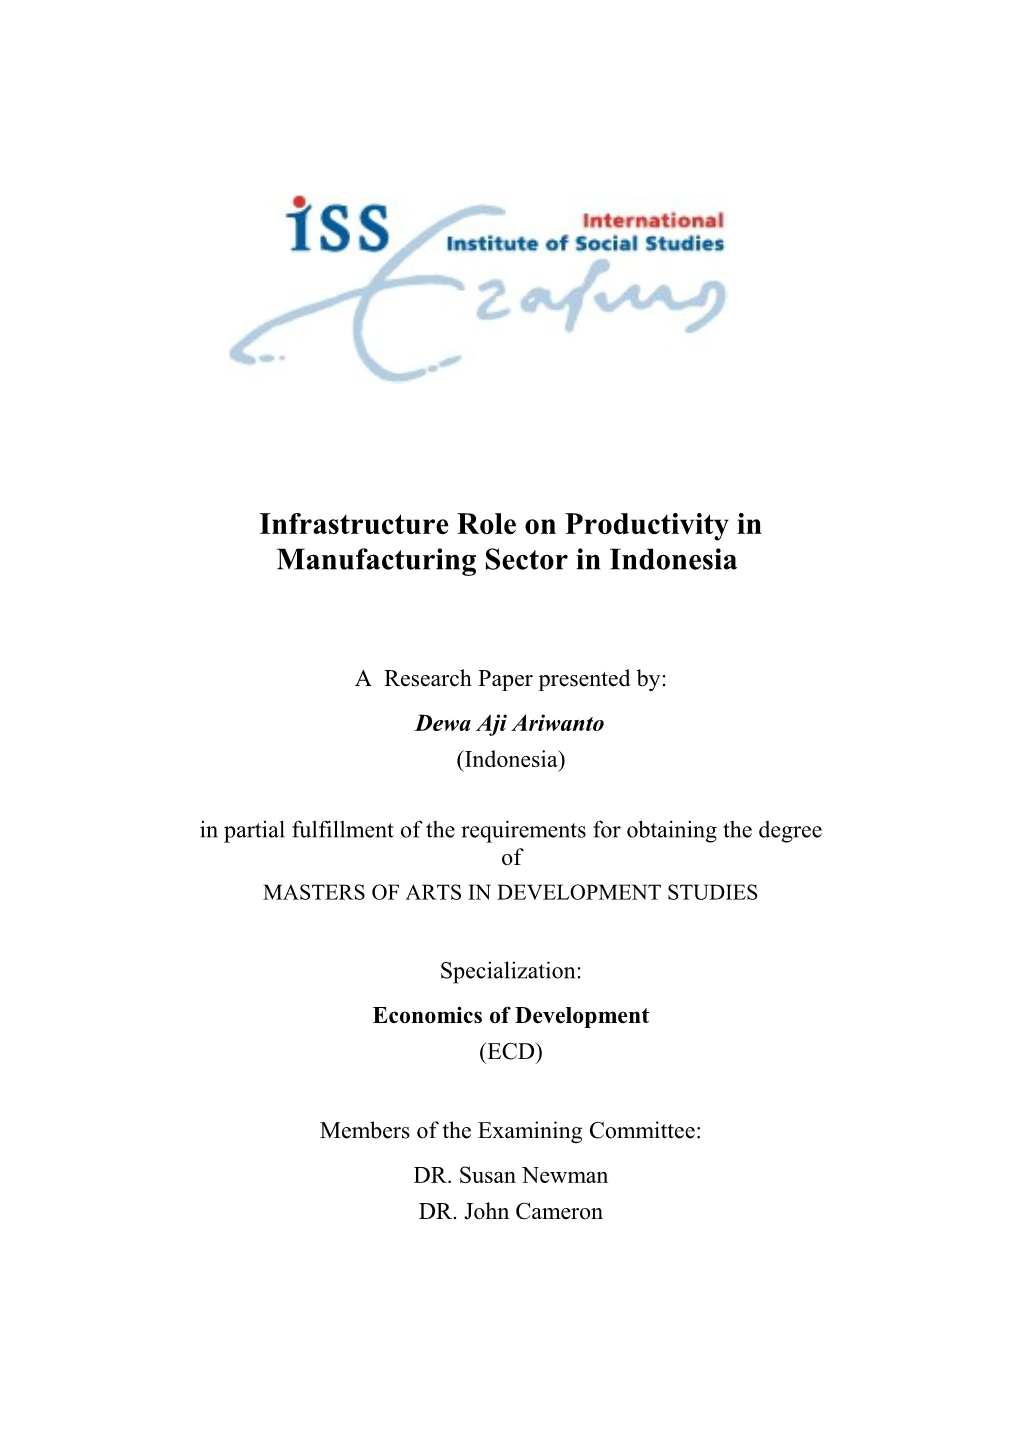 Infrastructure Role on Productivity in Manufacturing Sector in Indonesia